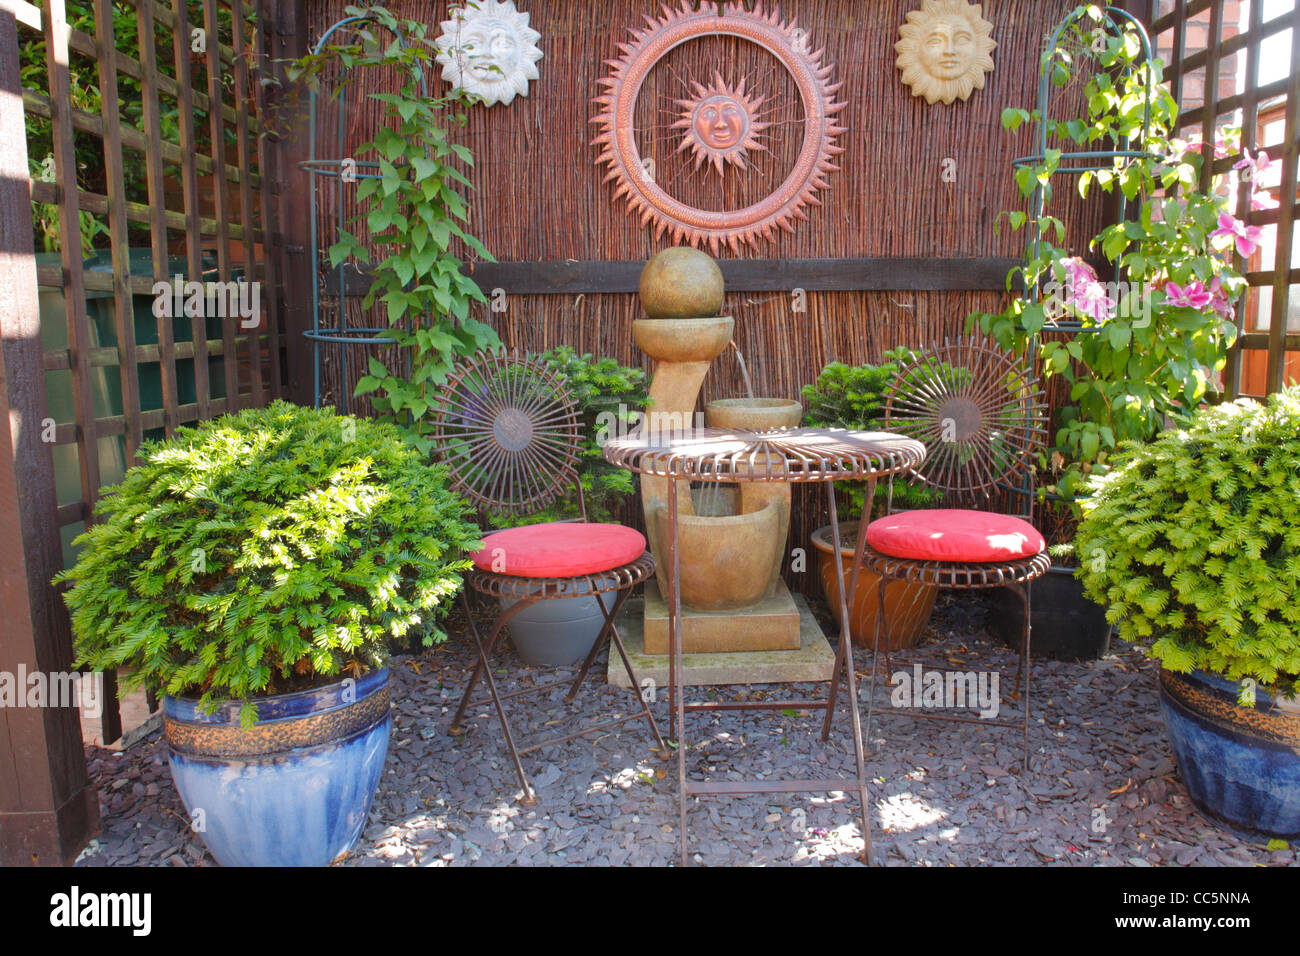 Arbor in an urban garden with table and chairs, potted plants and a water feature. Morecambe, England. June. Stock Photo